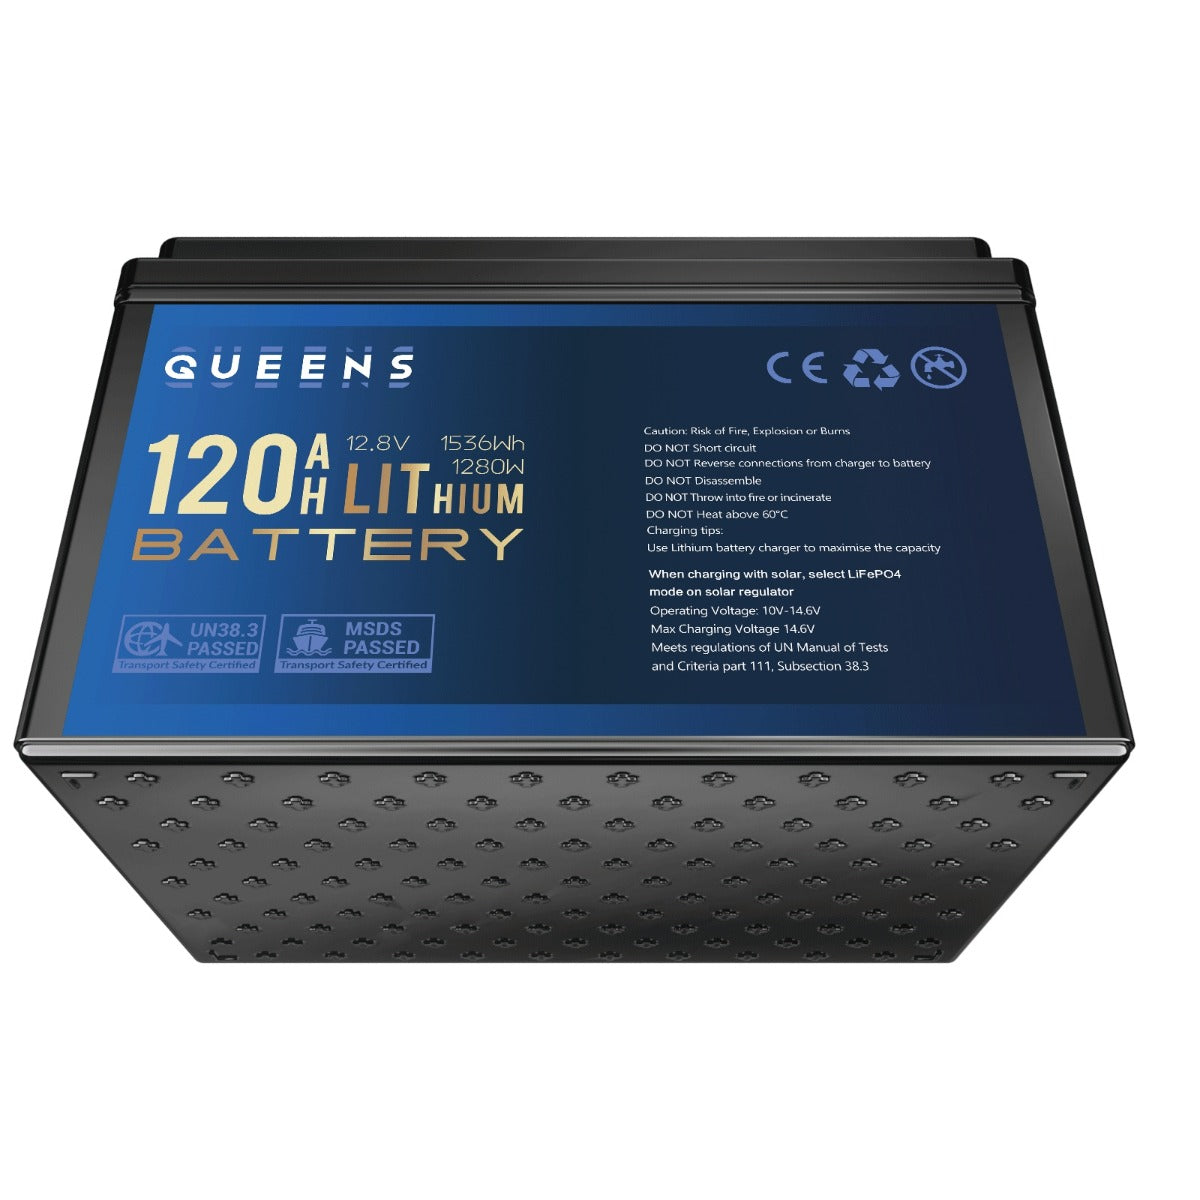 NEW Queens 120Ah 12V Lithium Battery